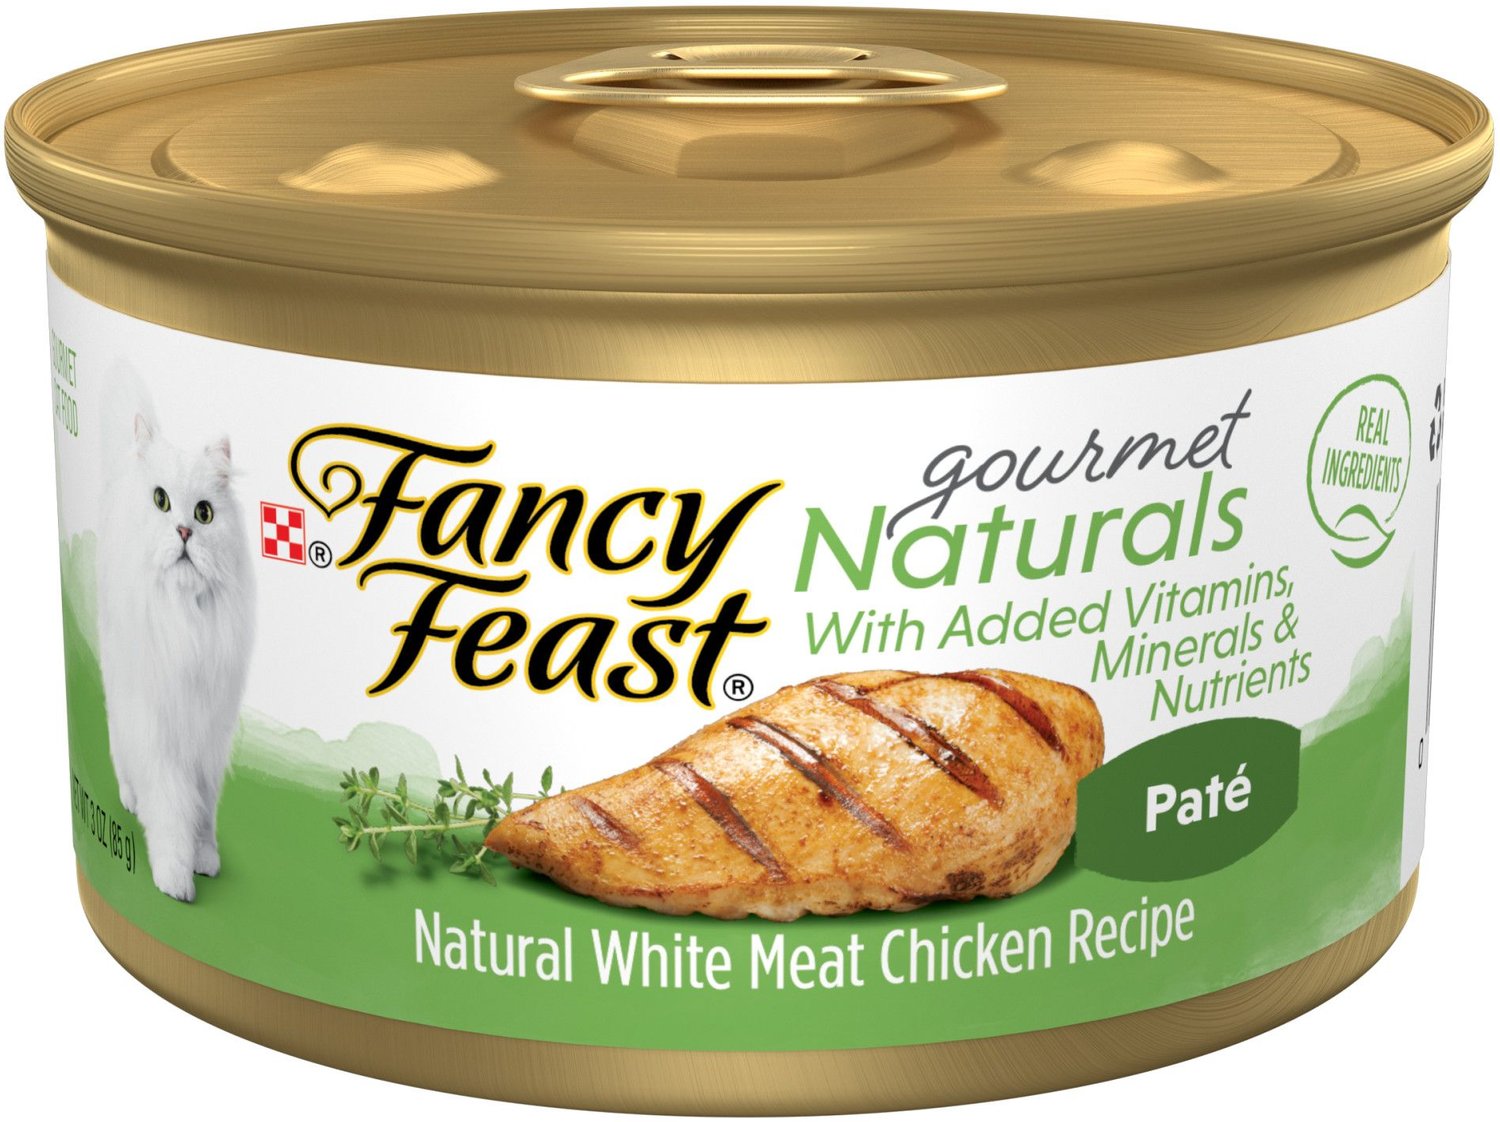 FANCY FEAST Gourmet Naturals White Meat 